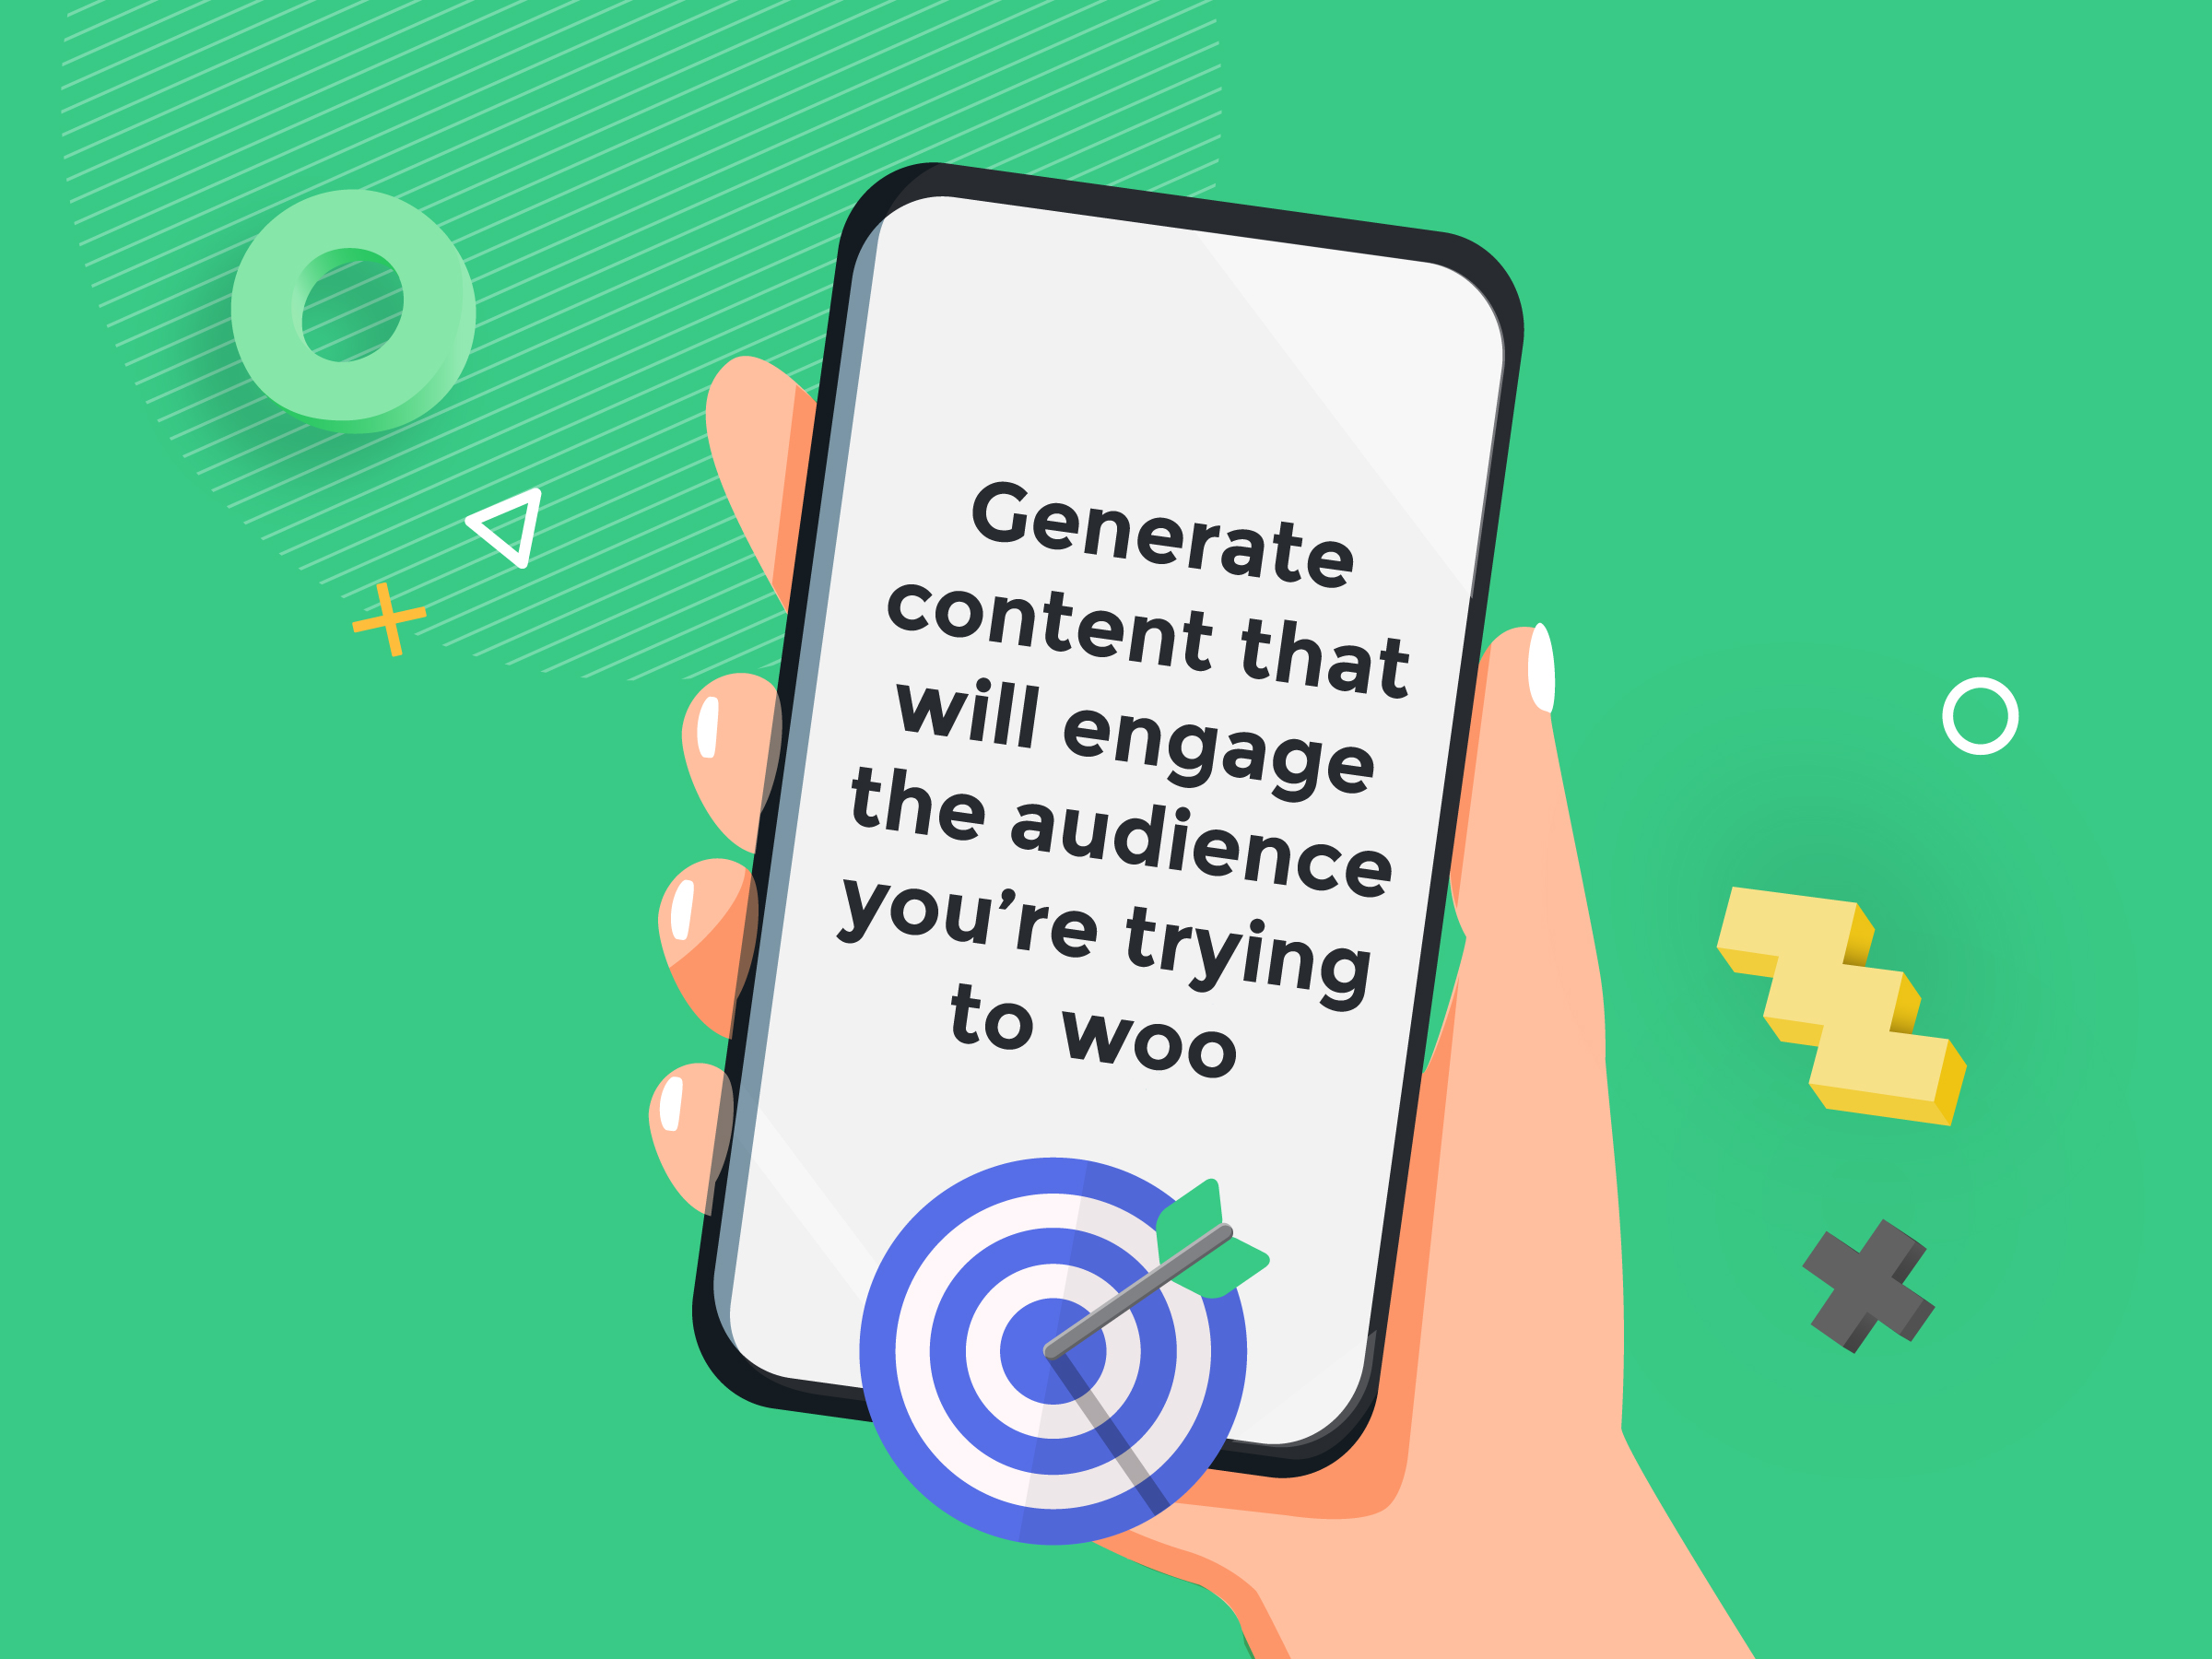 Generate content that will engage the audience you're trying to woo.